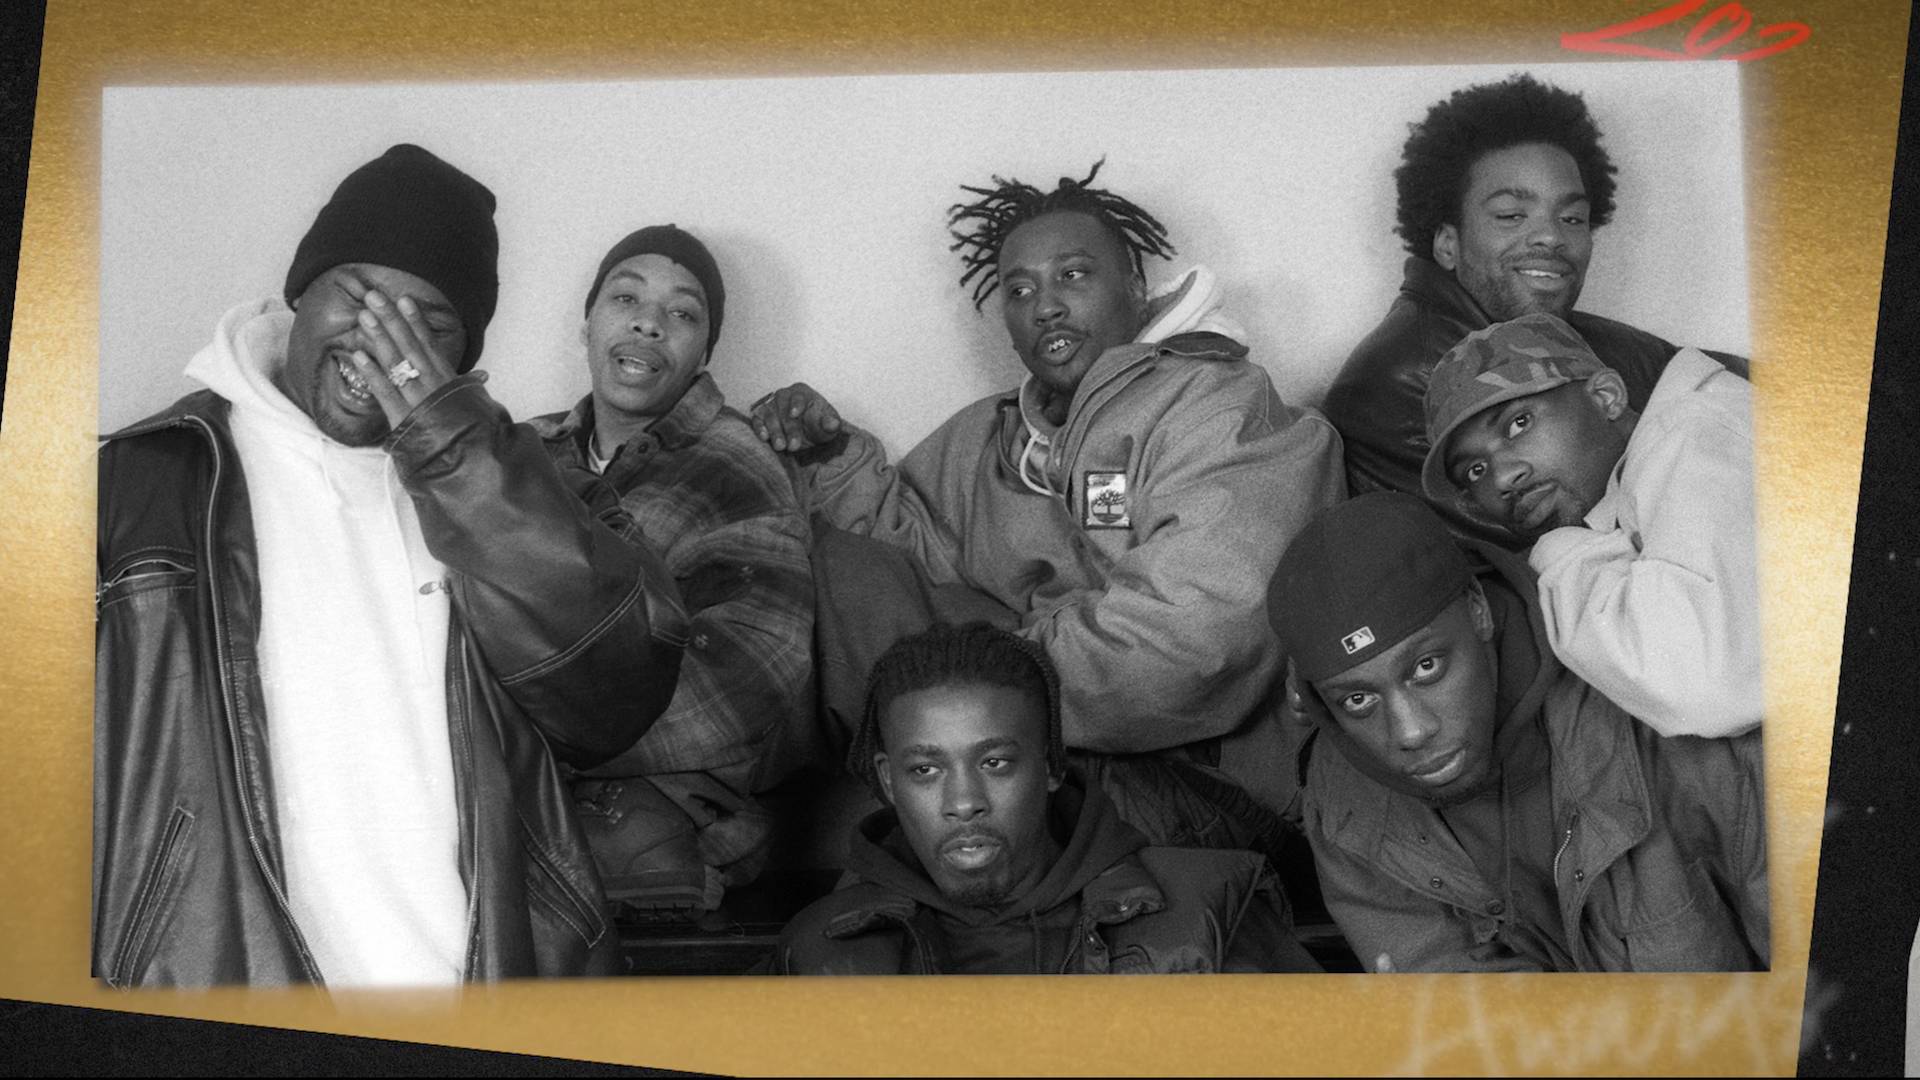 Legendary hip hop group Wu-Tang Clan members pictured in black and white.